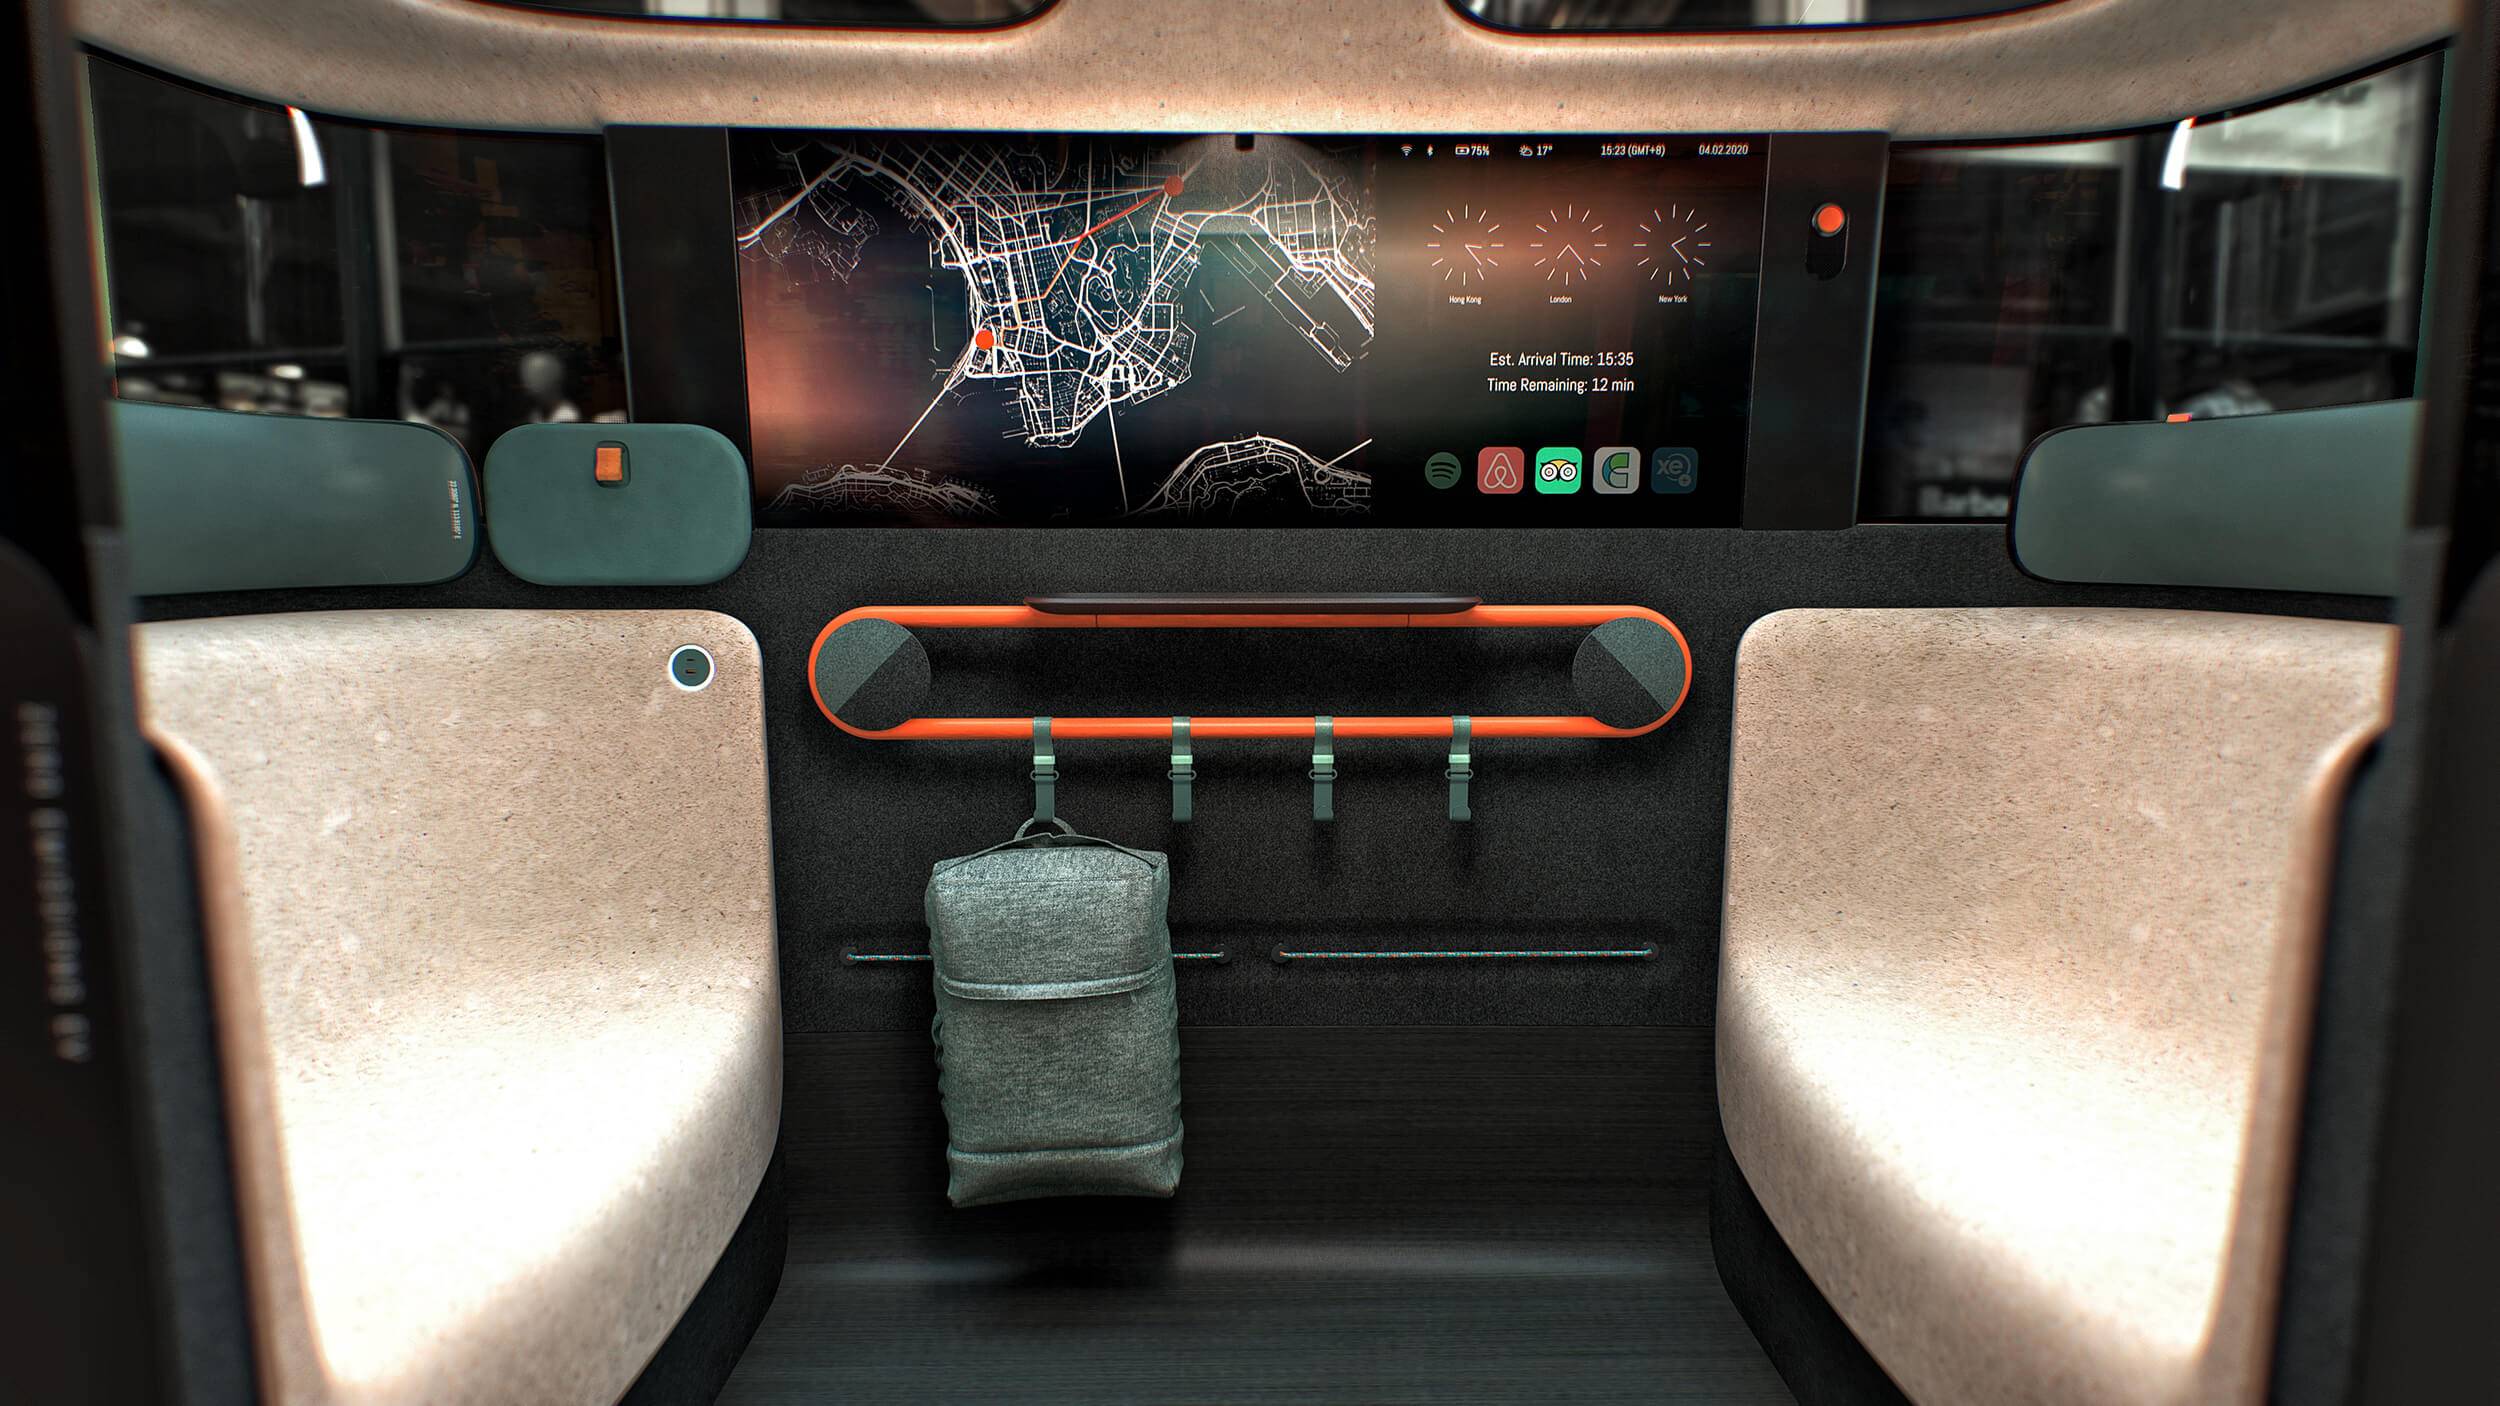 The Dromos autonomous vehicle interior. Two seats are facing one another, a large digital map is shown on the central window, while beneath, coat hooks are against the bottom wall of the vehicle. A rucksack hangs off one of the hooks